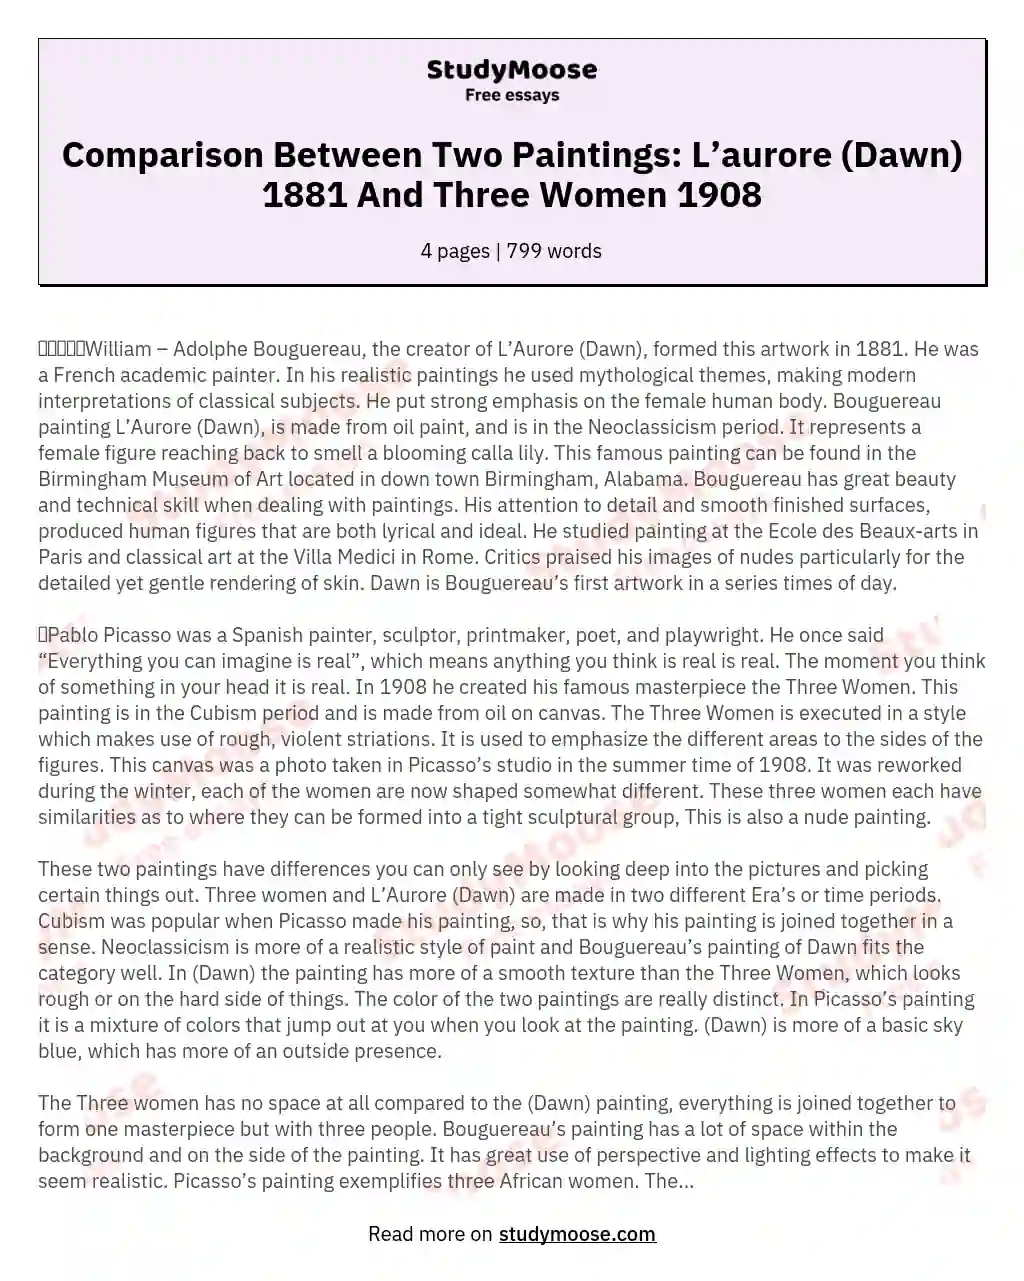 Comparison Between Two Paintings: L’aurore (Dawn) 1881 And Three Women 1908 essay